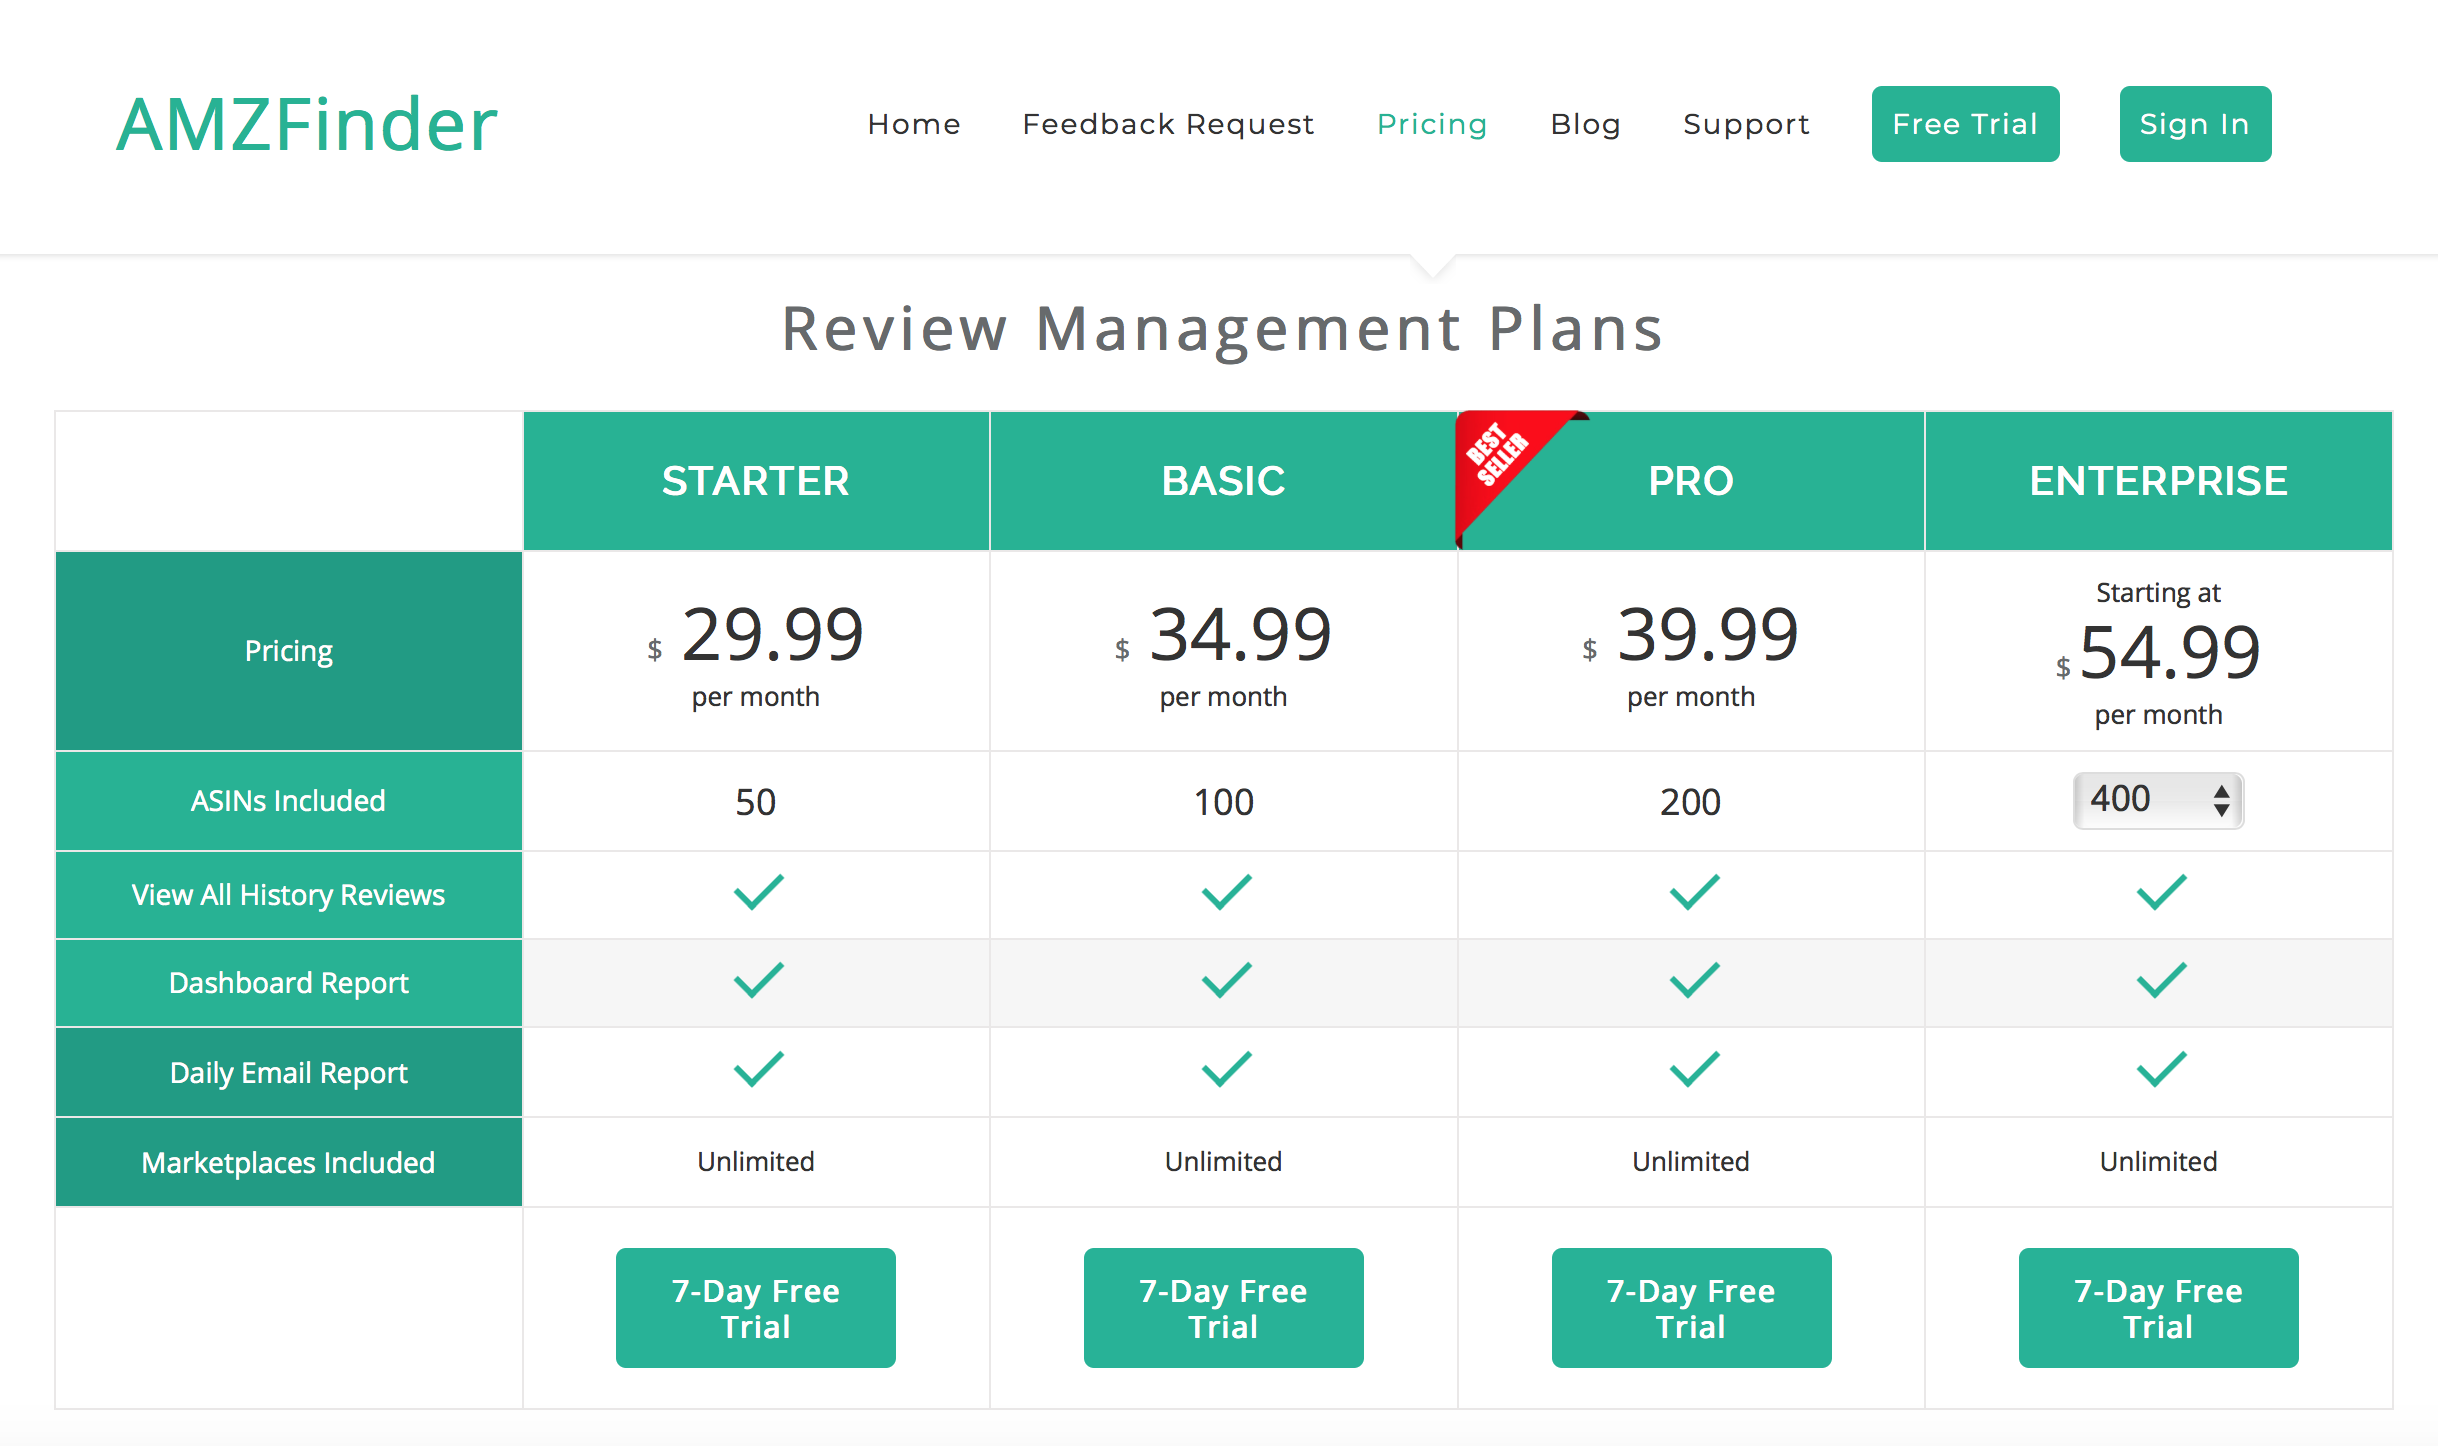 Amazon feedback tools: AMZFinder review management plans pricing grid